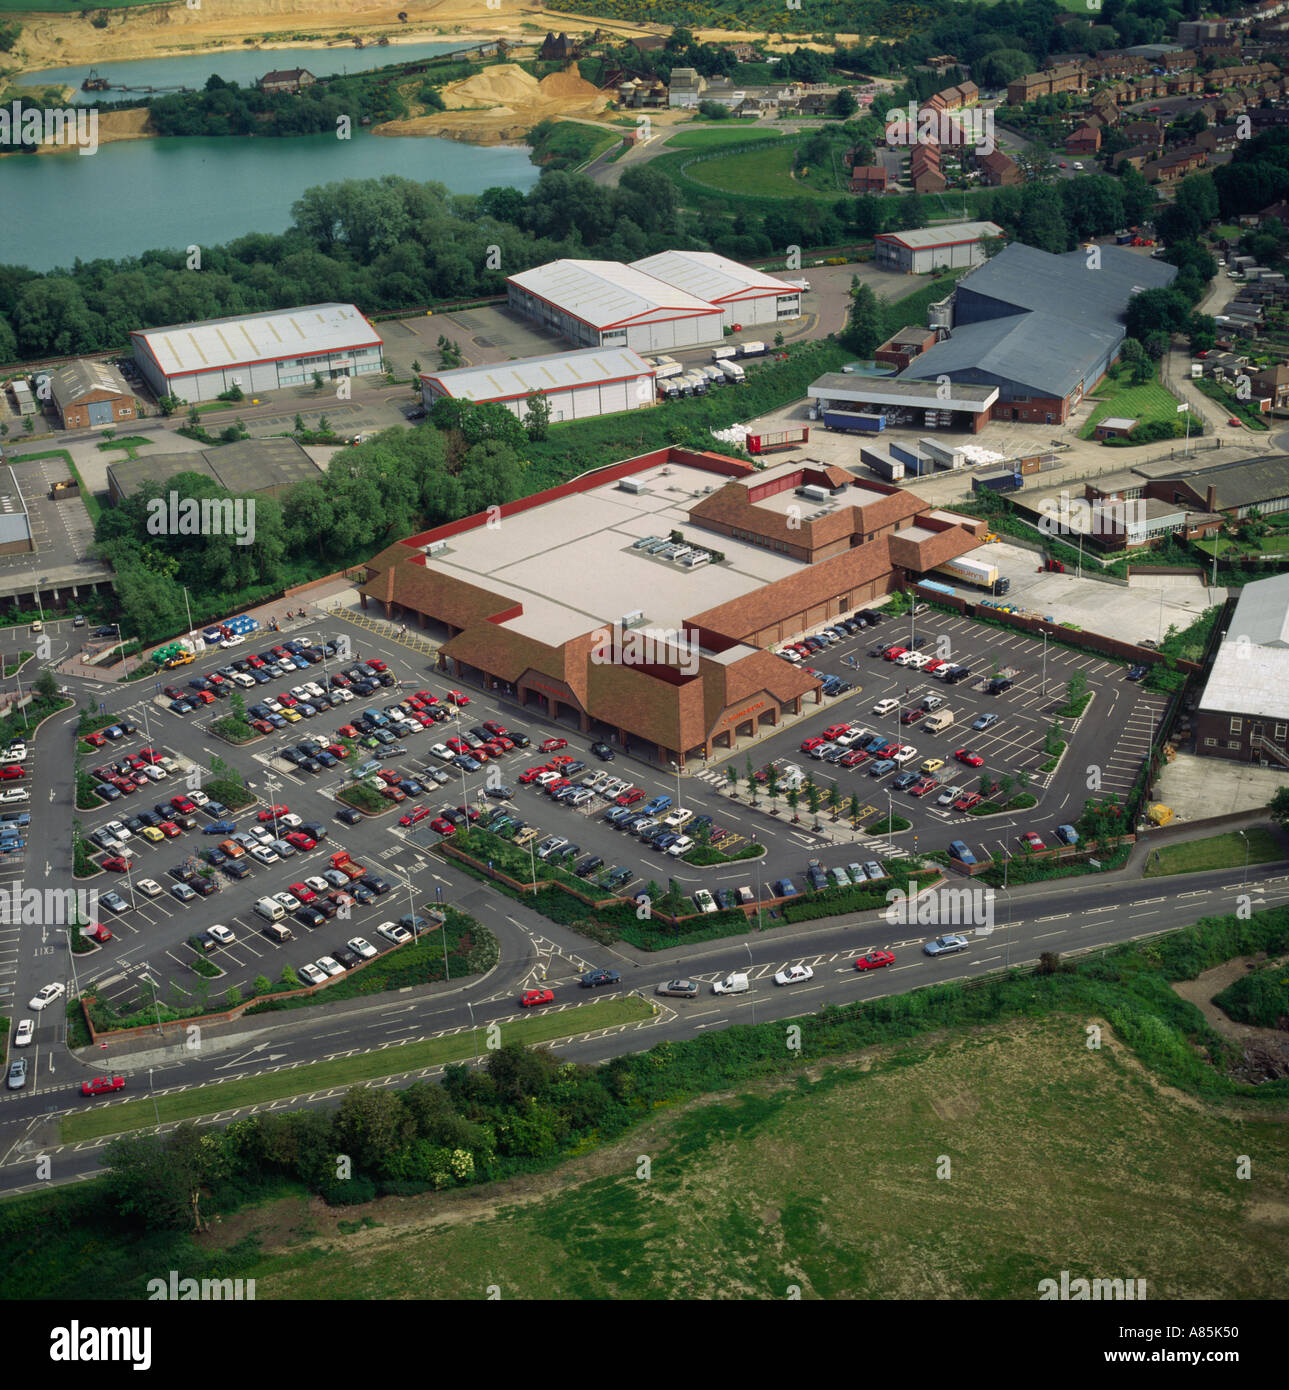 Out of town supermarket UK aerial view Stock Photo